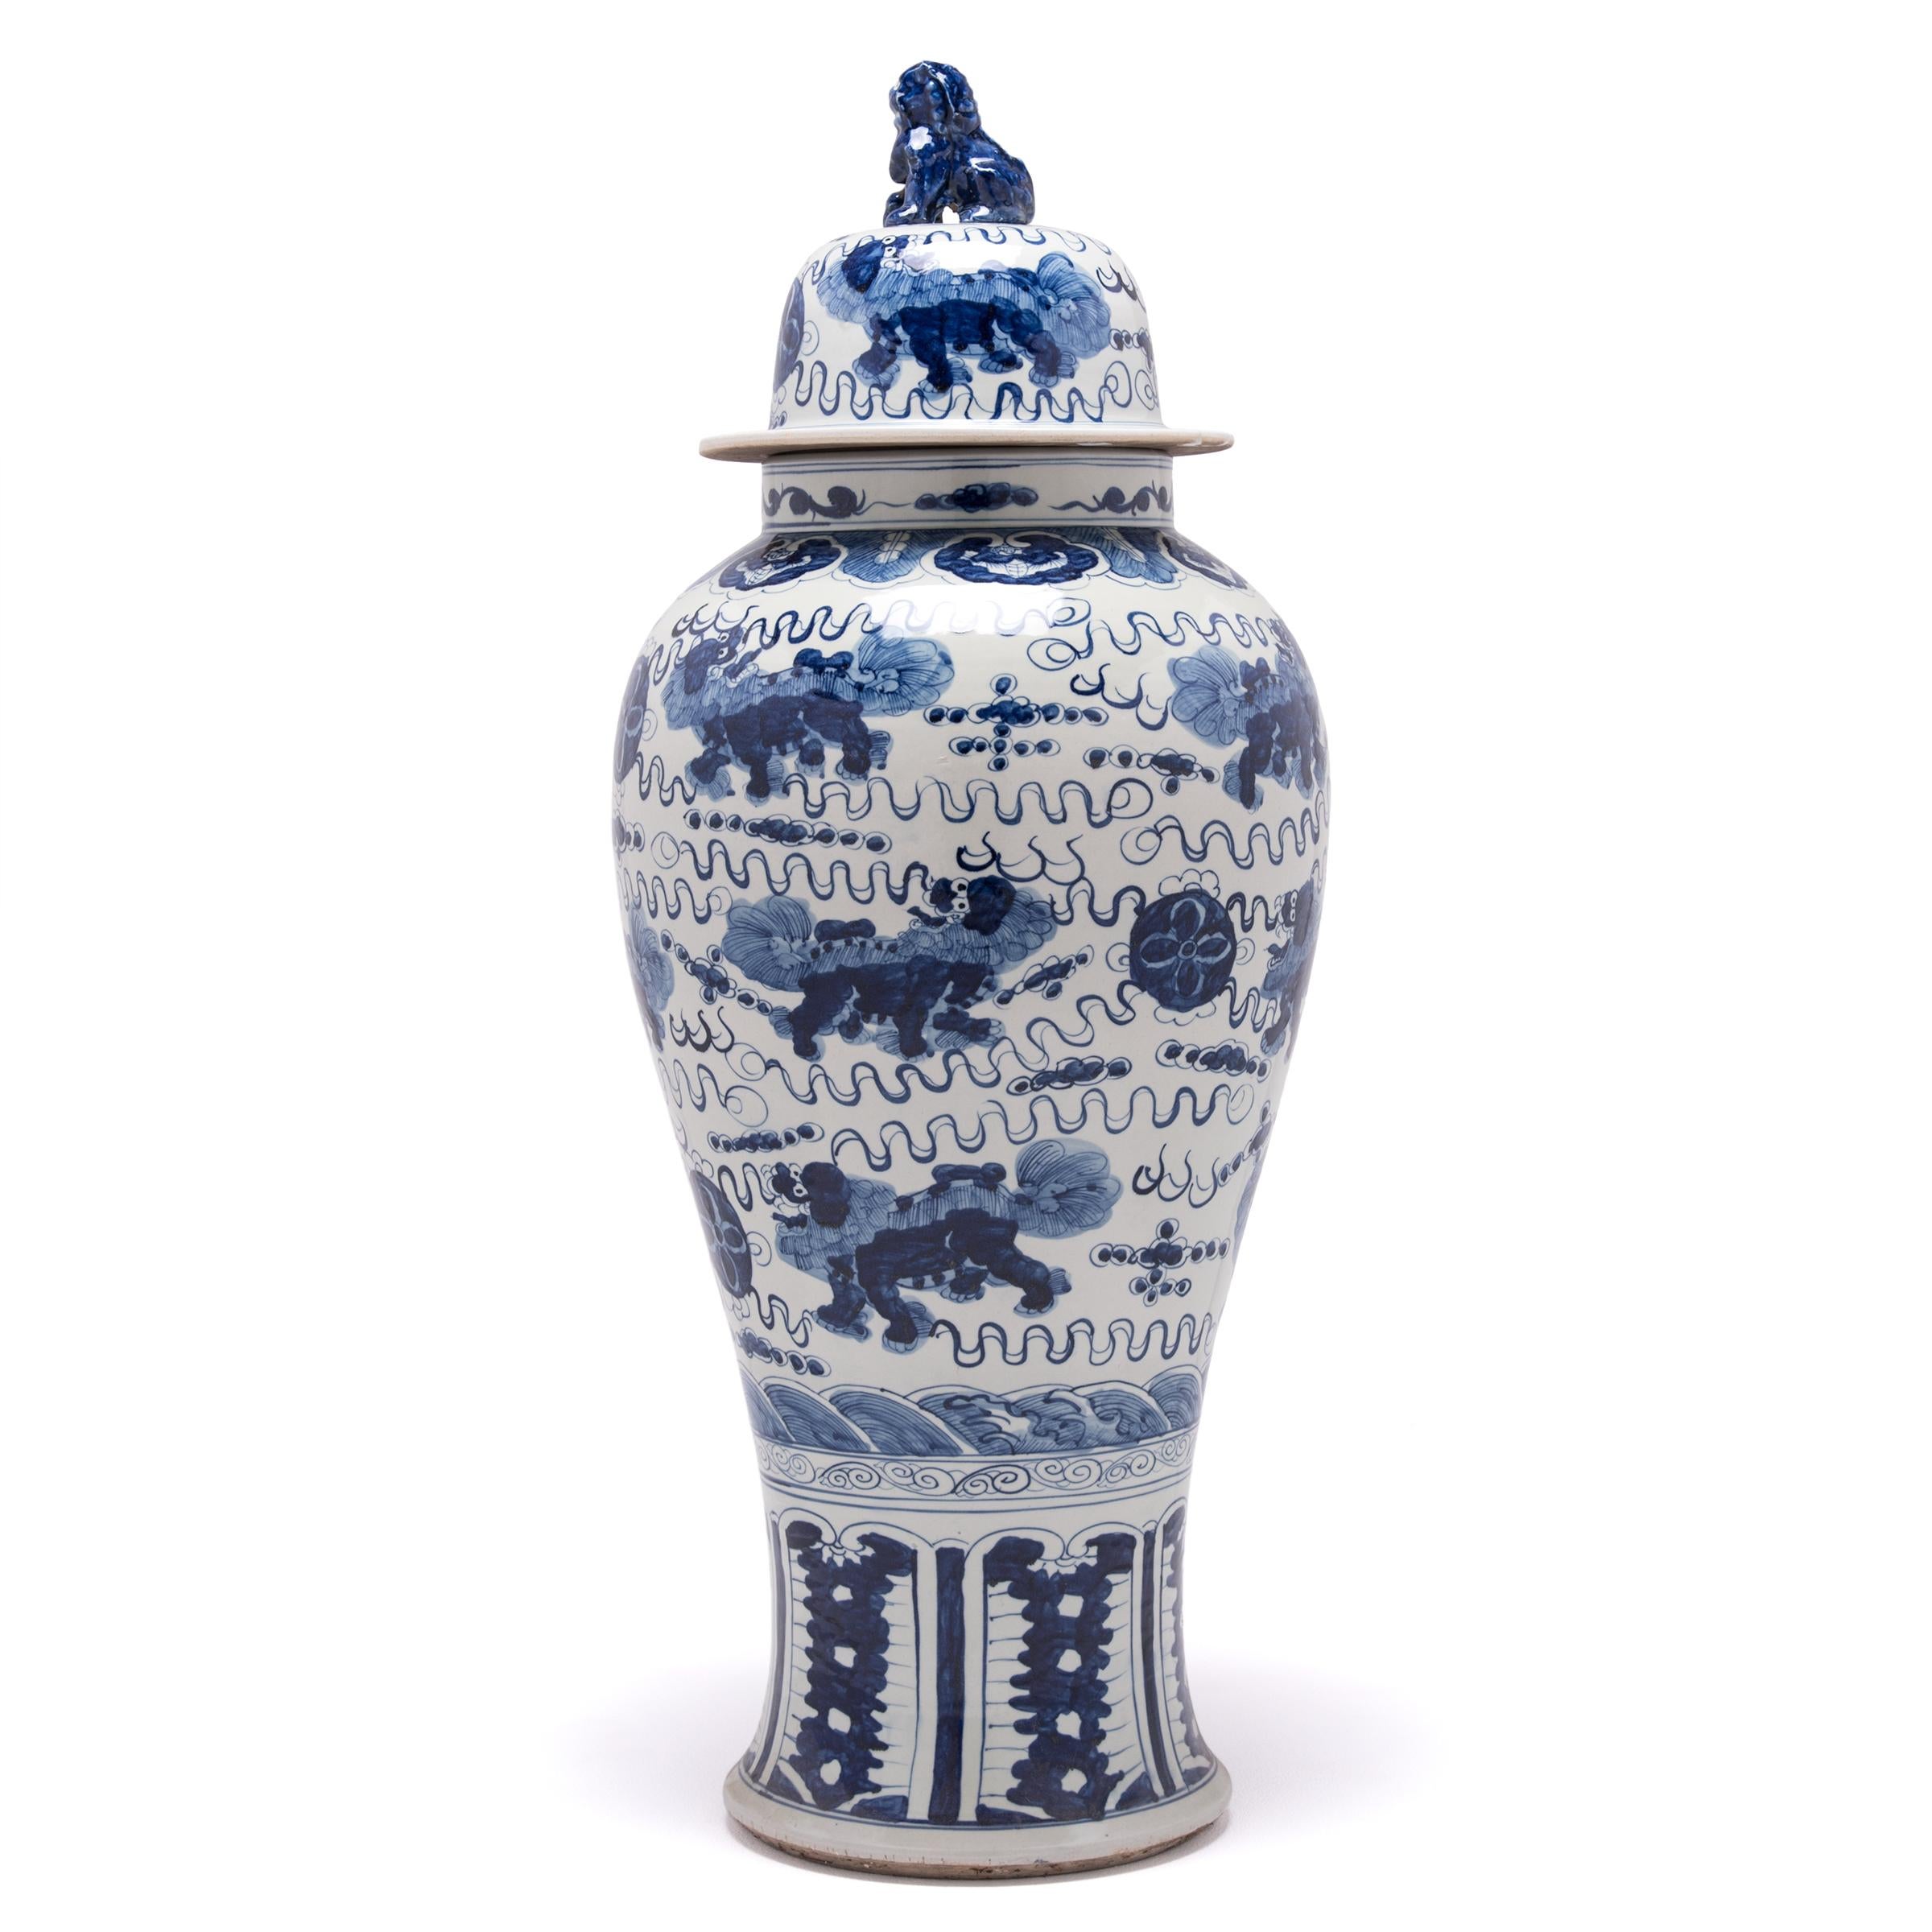 Dating back to the Tang dynasty, blue-and-white porcelain has played a long and celebrated role in Chinese ceramic history. Prized for its pristine white surface and finely painted decoration in rich cobalt blue, blue-and-white porcelain was